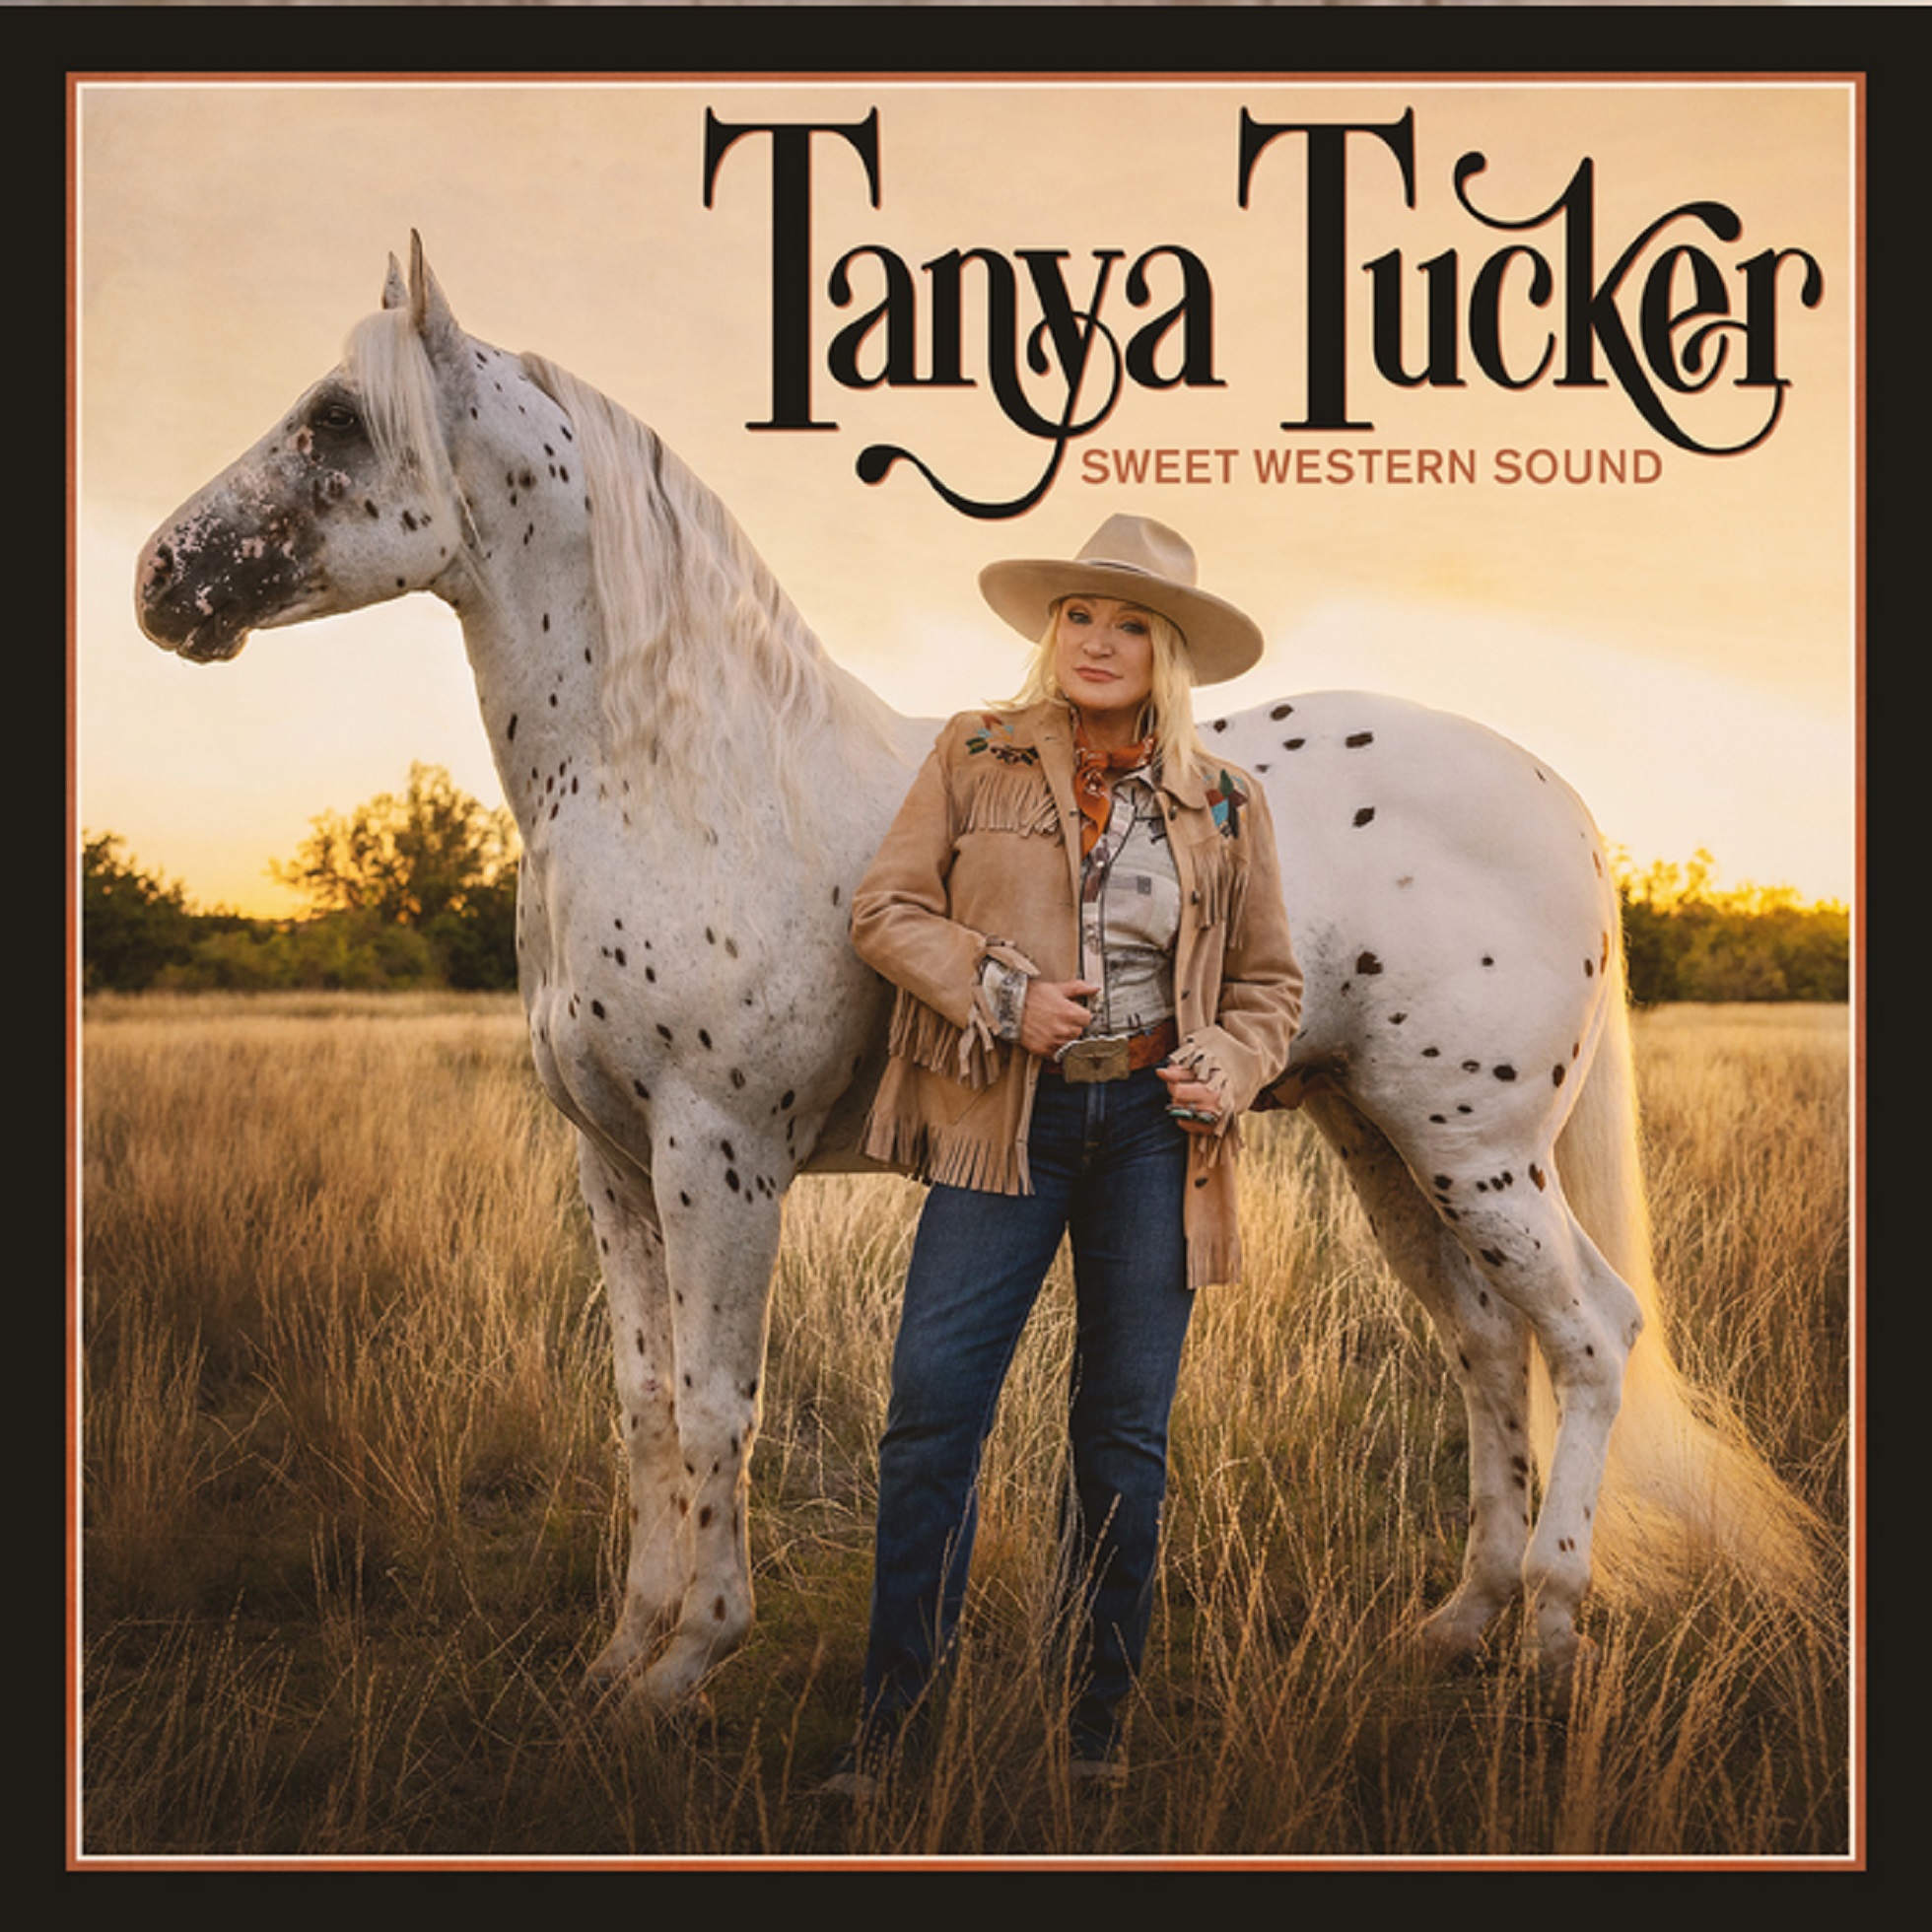 Tanya Tucker's new song "When The Rodeo Is Over (Where Does The Cowboy Go?)" debuts today